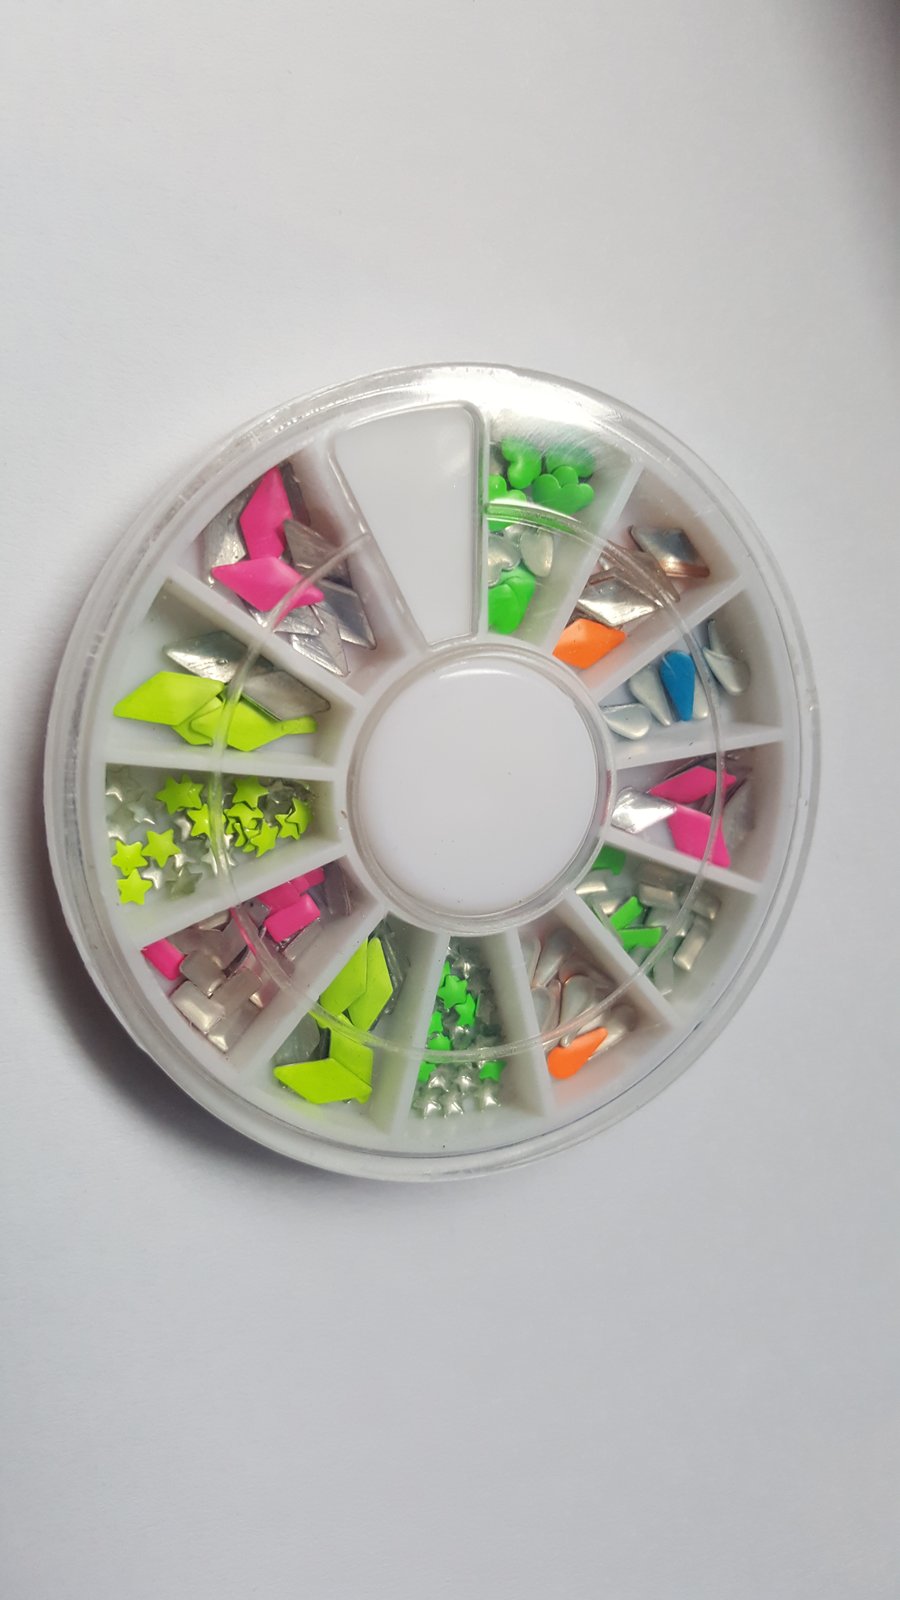 1 x Filled Storage Wheel - 6cm - Mixed Shaped Studs - Mixed Colour 